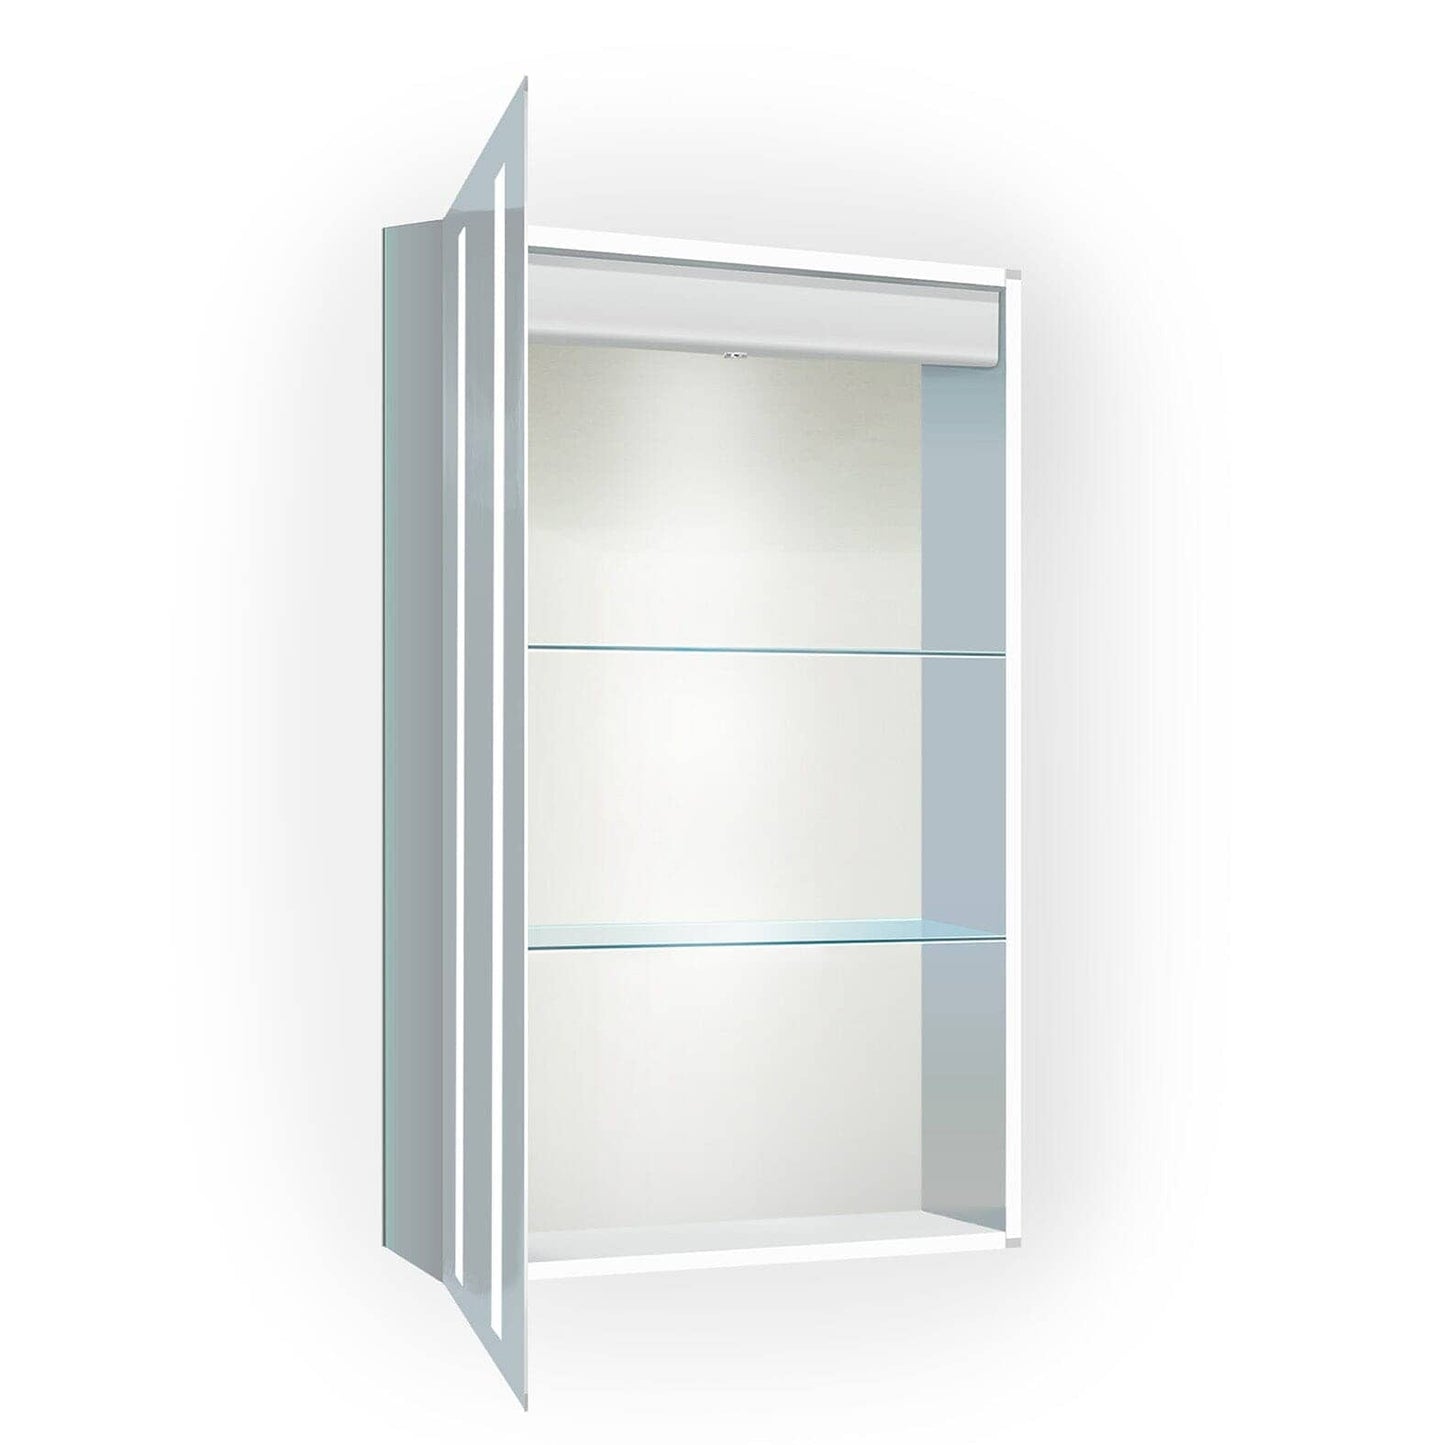 Kinetic 20″ x 30″ Lighted Medicine Cabinet w/Dimmer & Defogger Lighted Medicine Cabinet, LED Medicine Cabinet, Lighted Medicine Cabinet With Mirror Krugg Reflections USA 